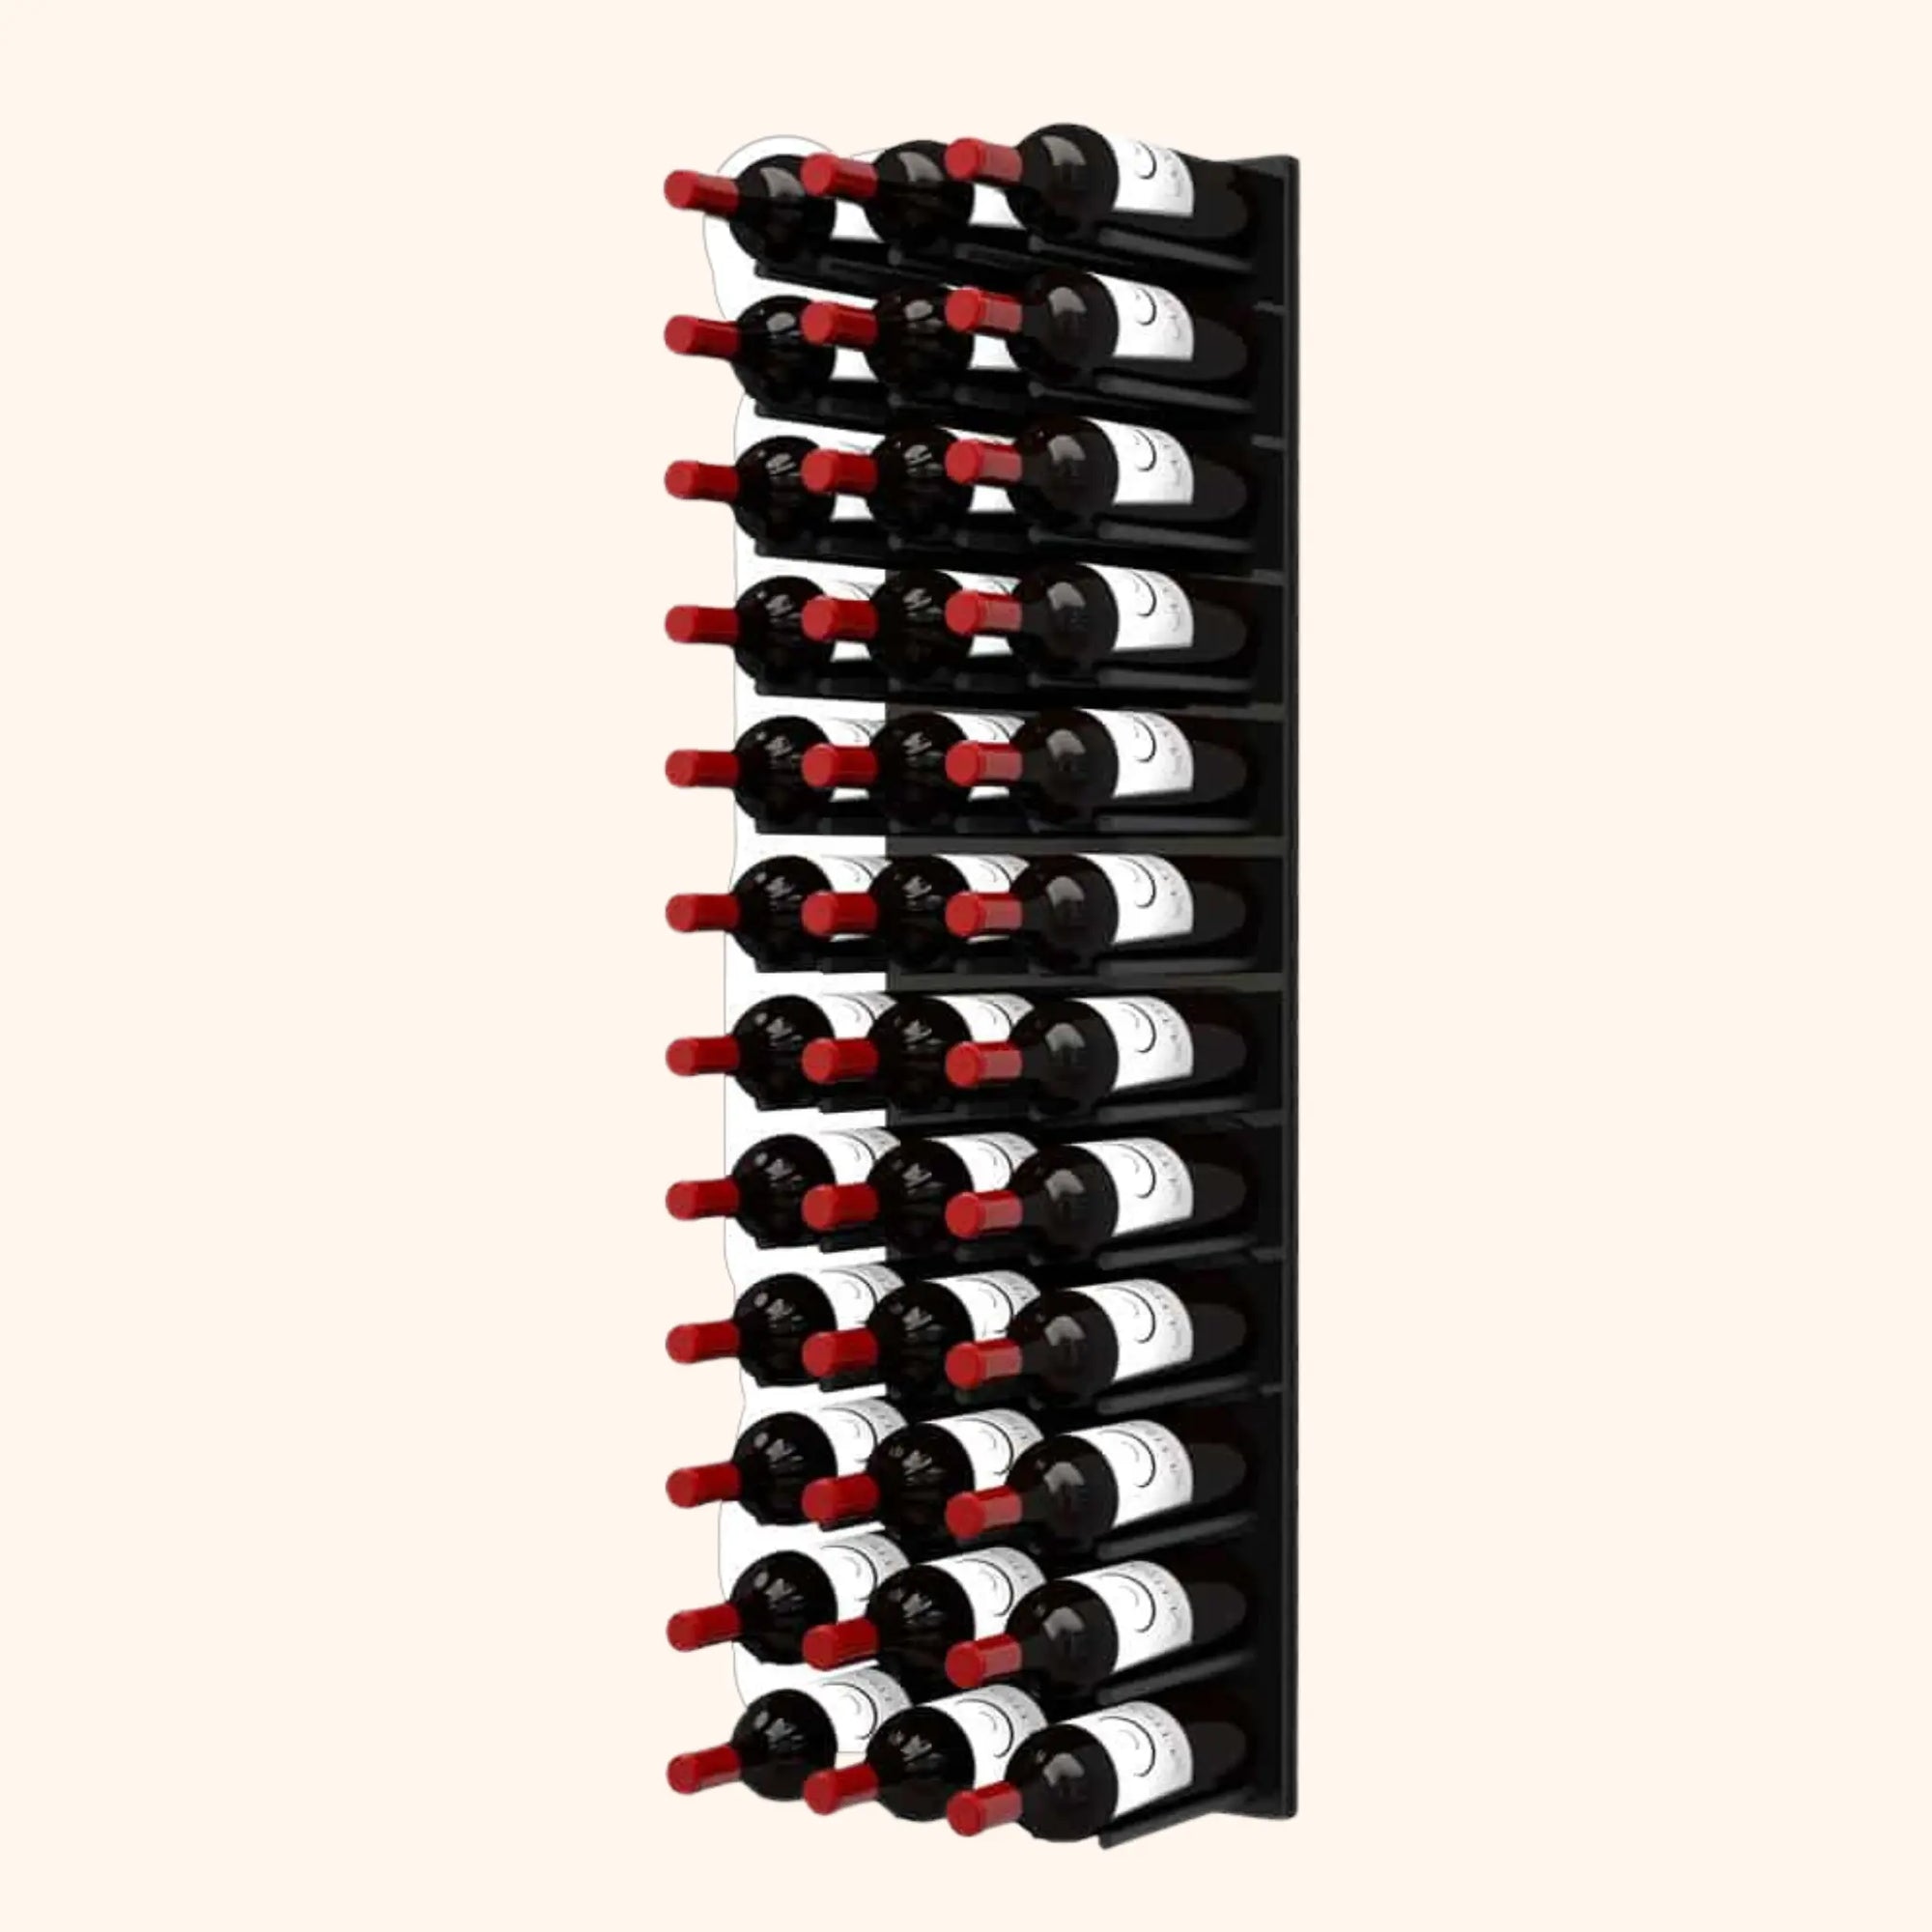 Ultra Wine Racks & Cellars | Fusion ST Cork-Out Wine Wall Black Acrylic 4FT Ultra Wine Racks & Cellars